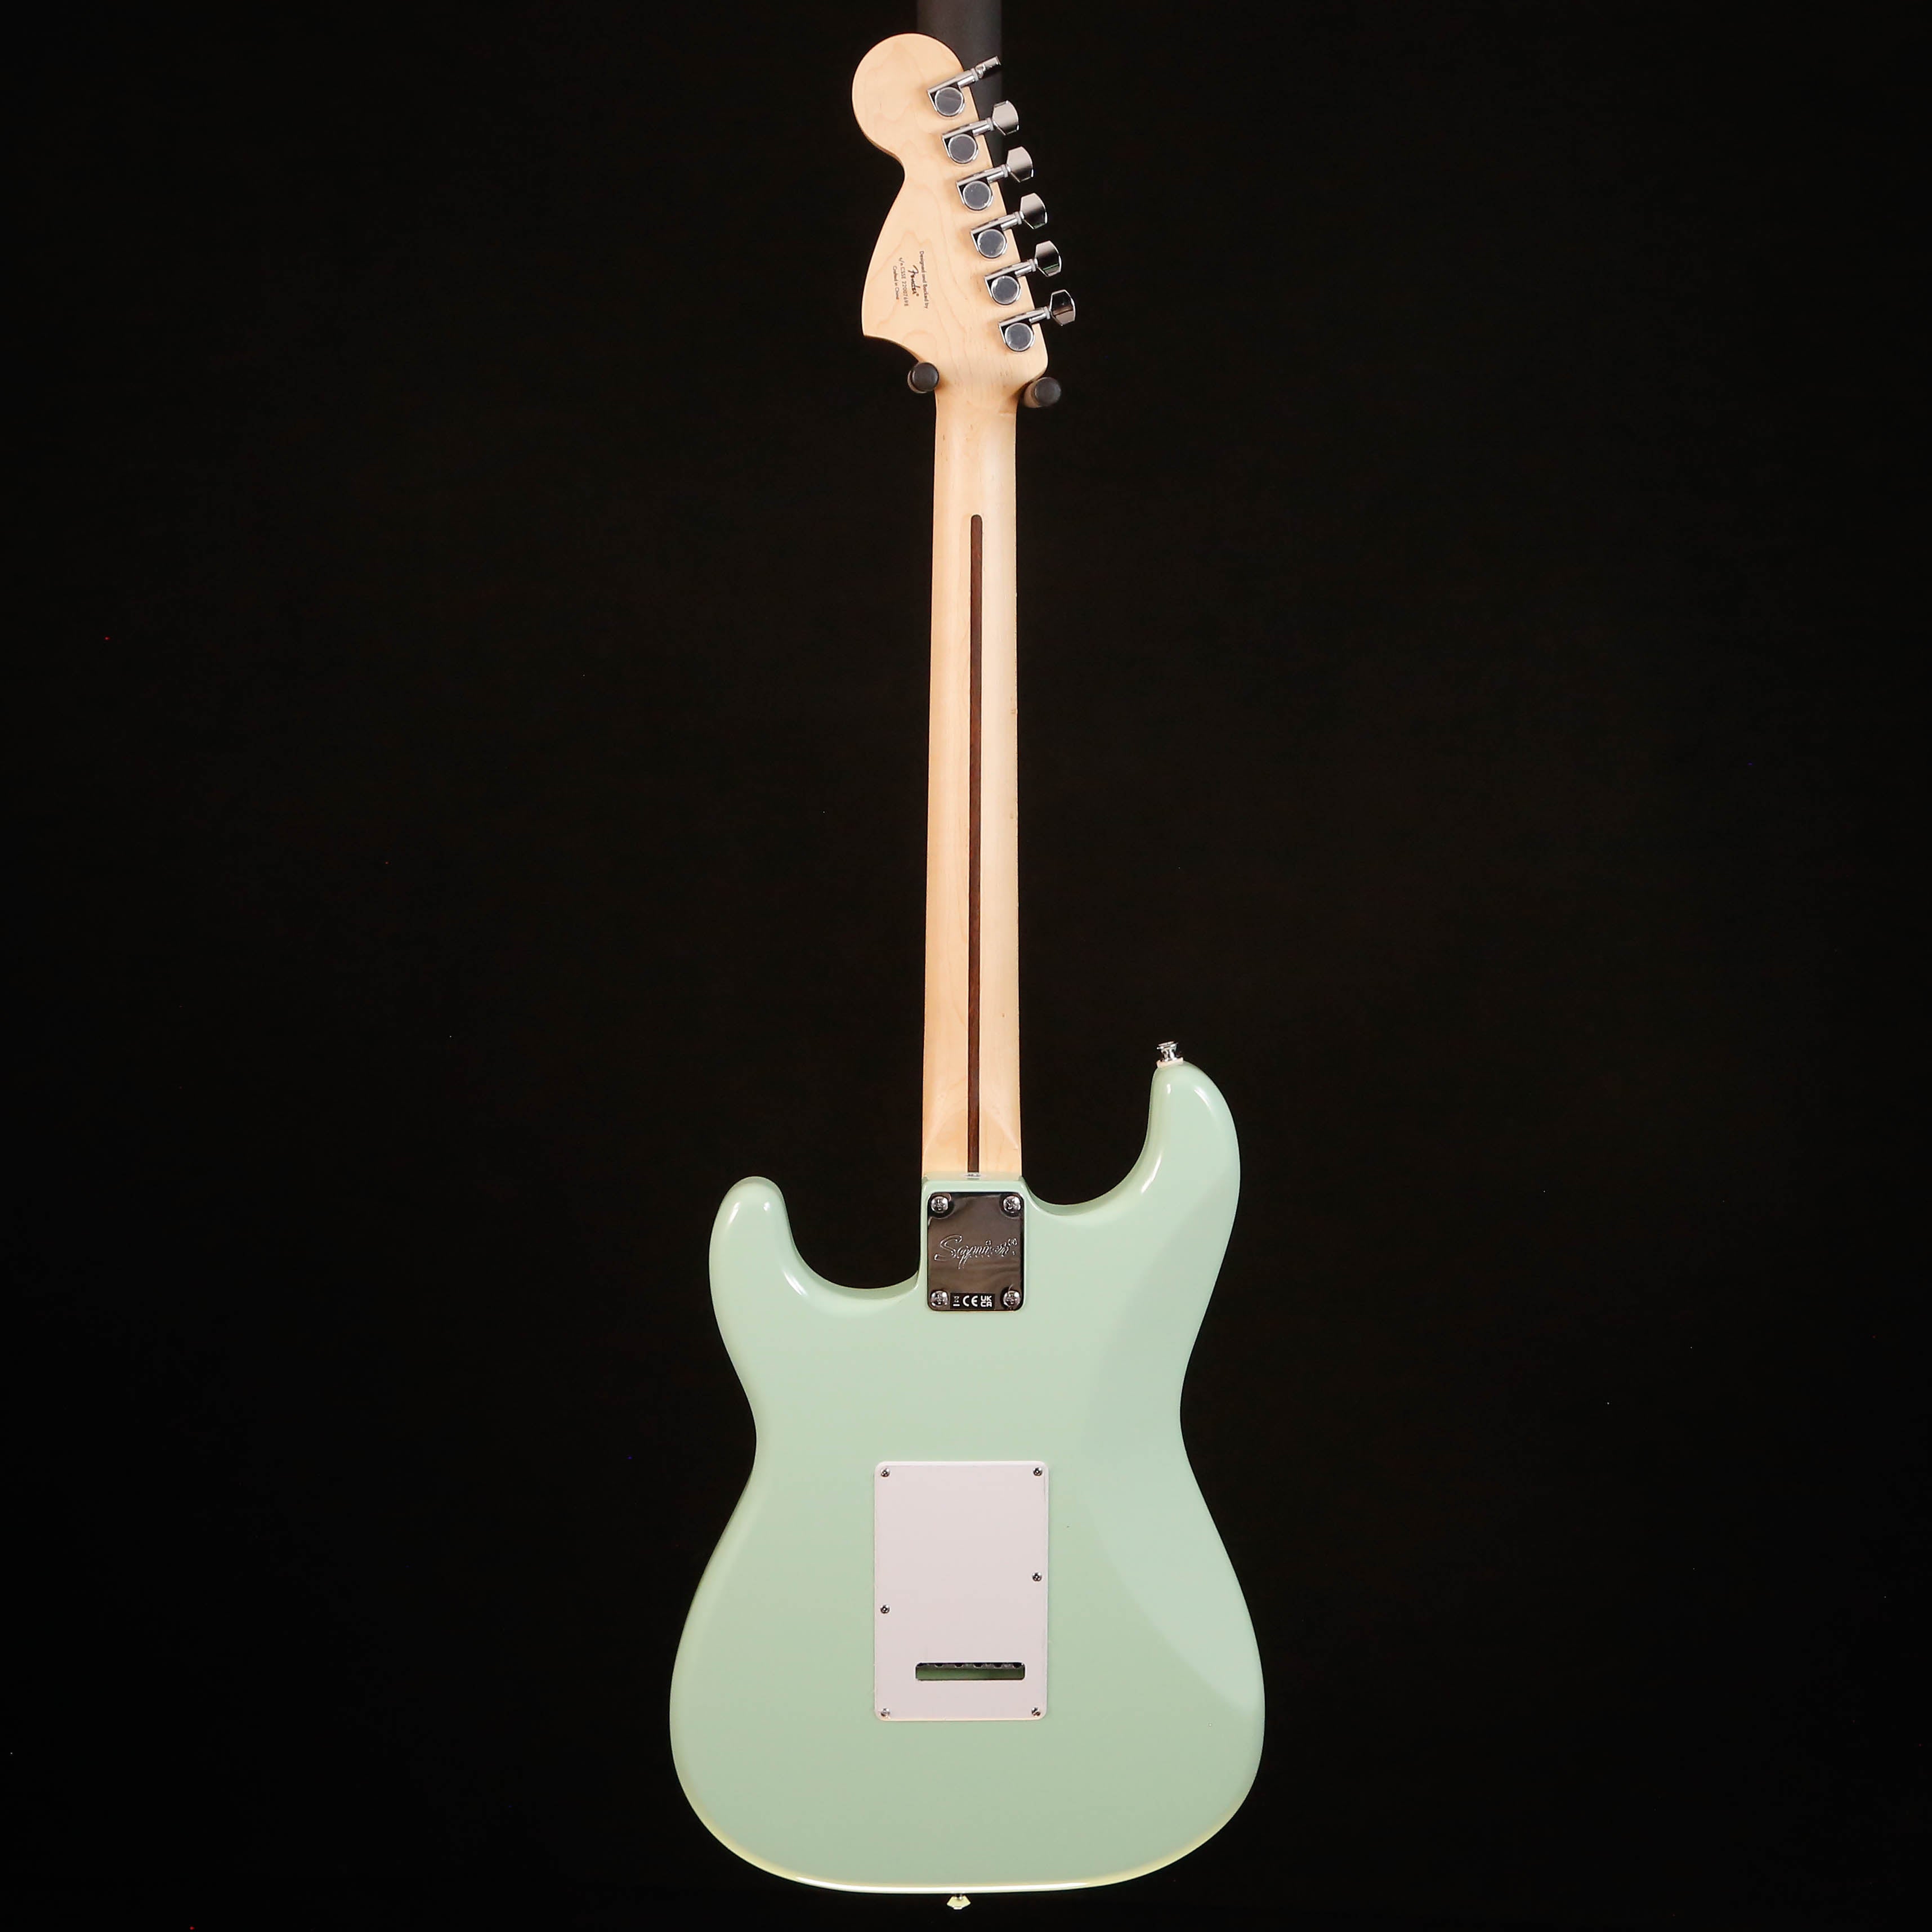 Squier Affinity Series Stratocaster HSS Limited Edition Electric Guitar in  Ice Blue Metallic